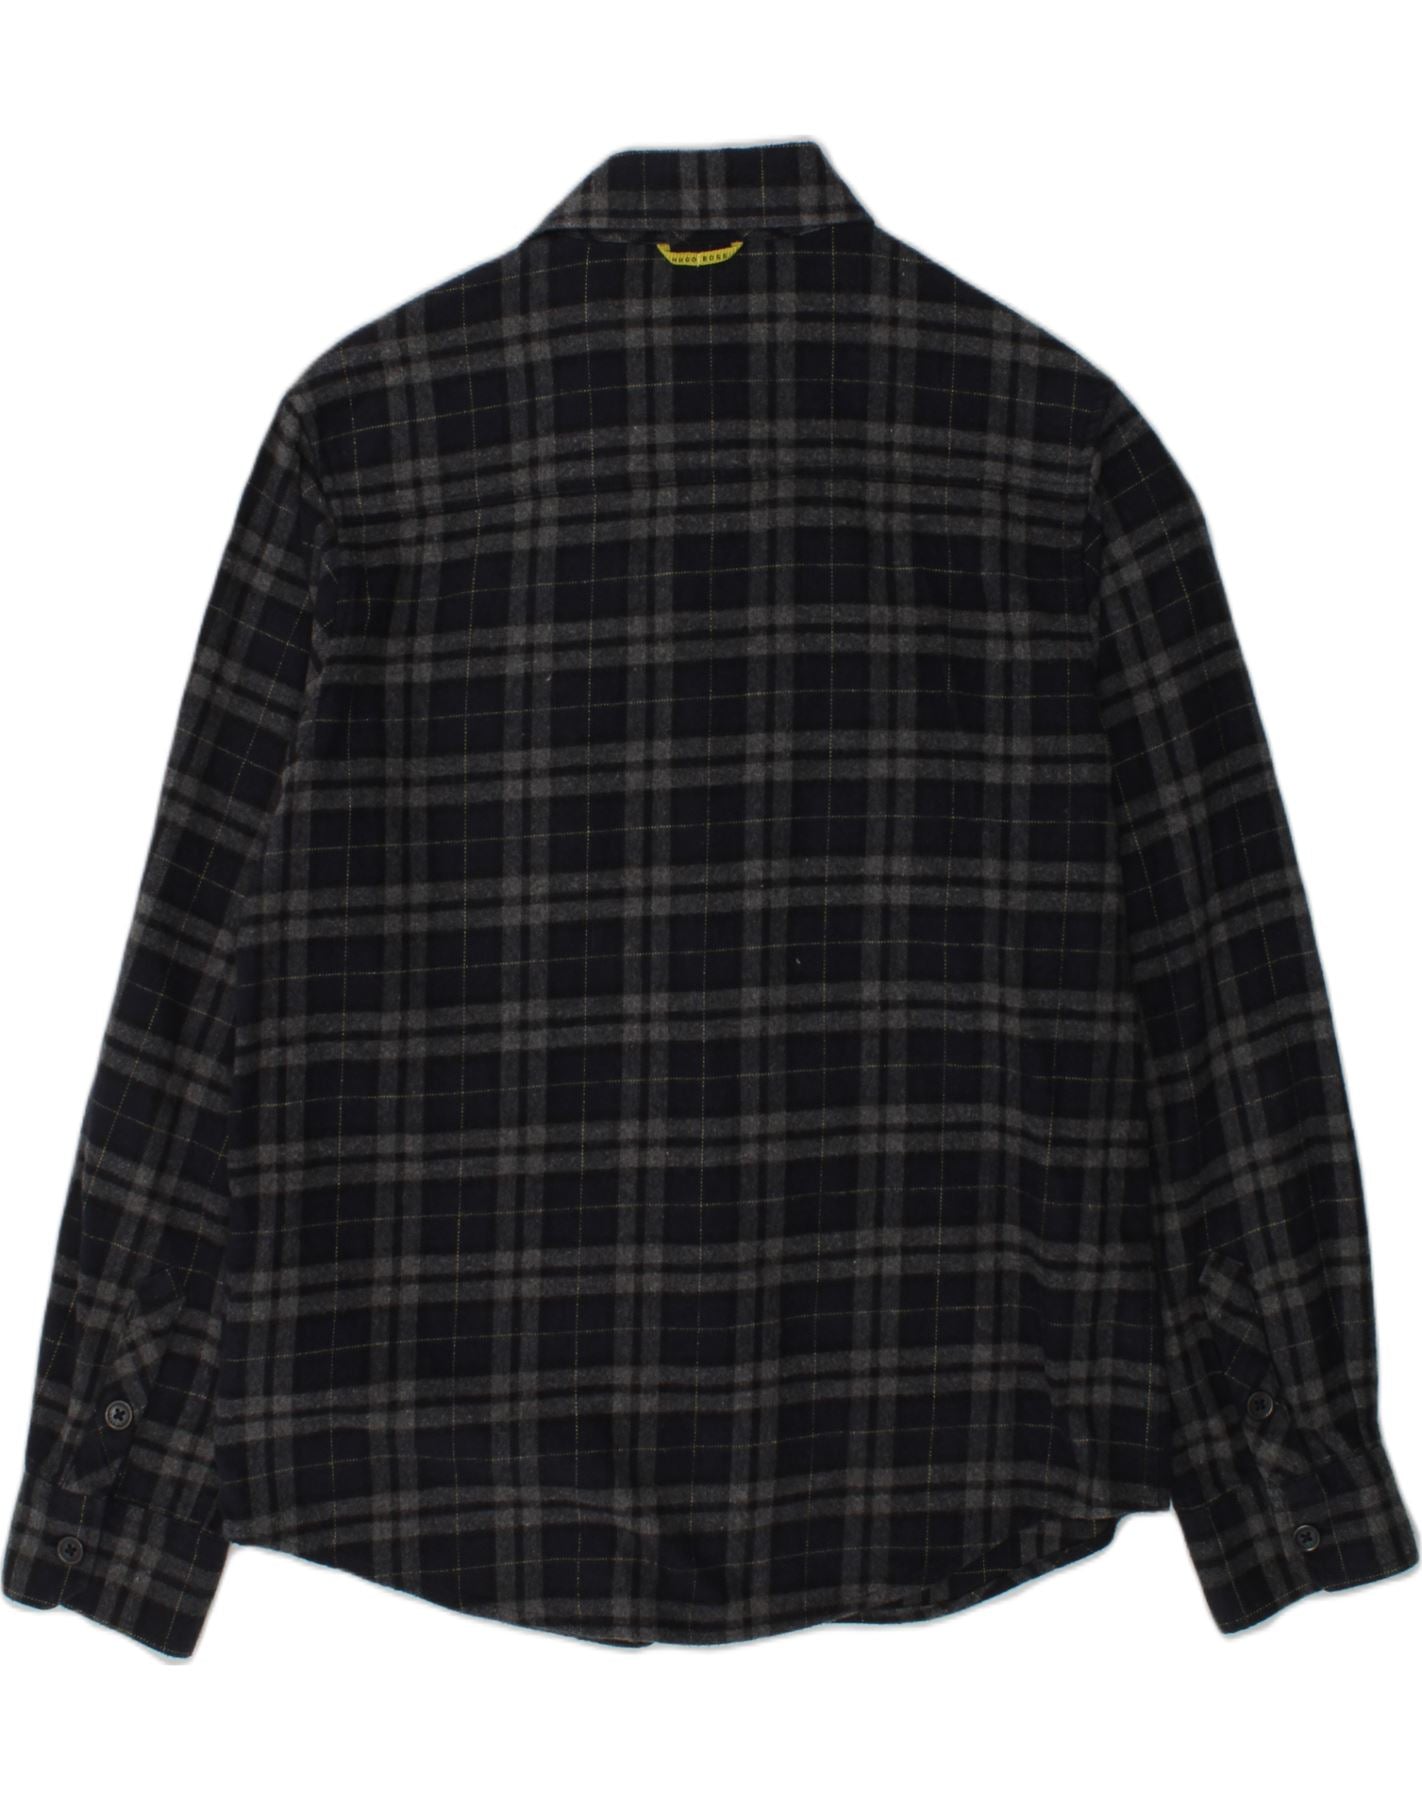 Pre-owned Dolce & Gabbana Vintage Black Checkered Cotton Knit